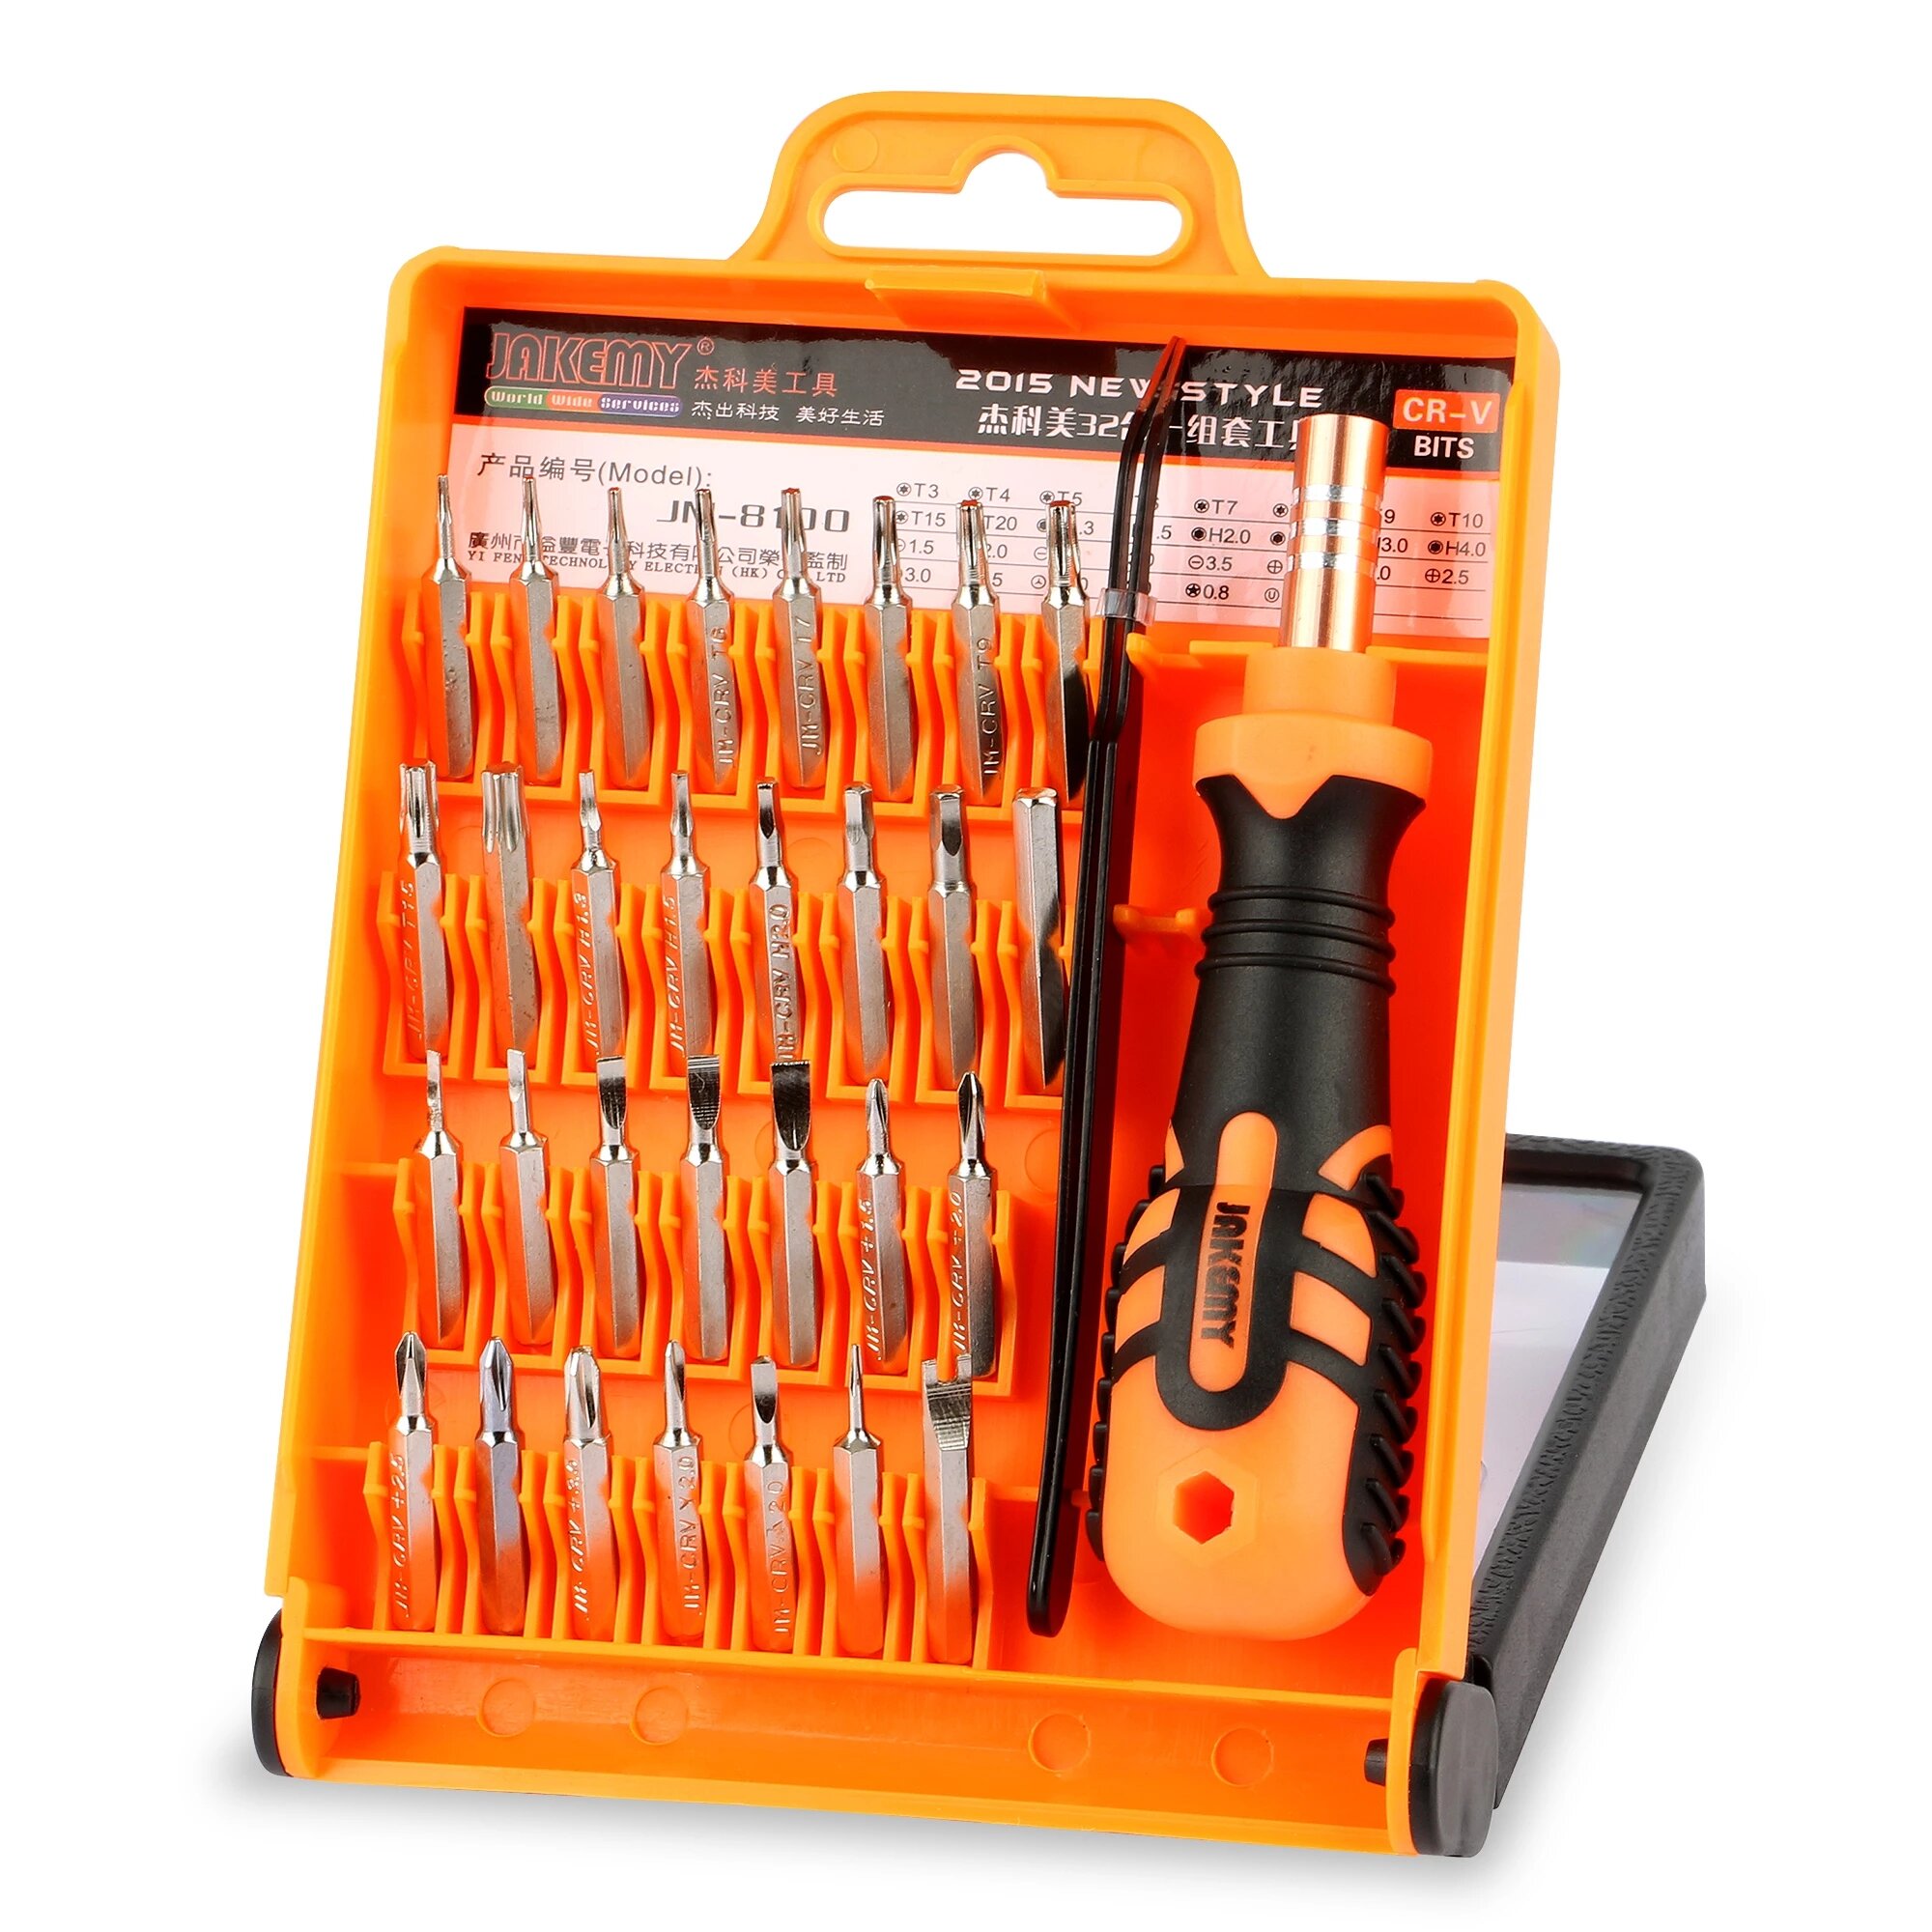 JAKEMY JM-8100 32 IN 1 Multifunctional Precision Screwdriver Set with Adjustable Ratchet Handle and 